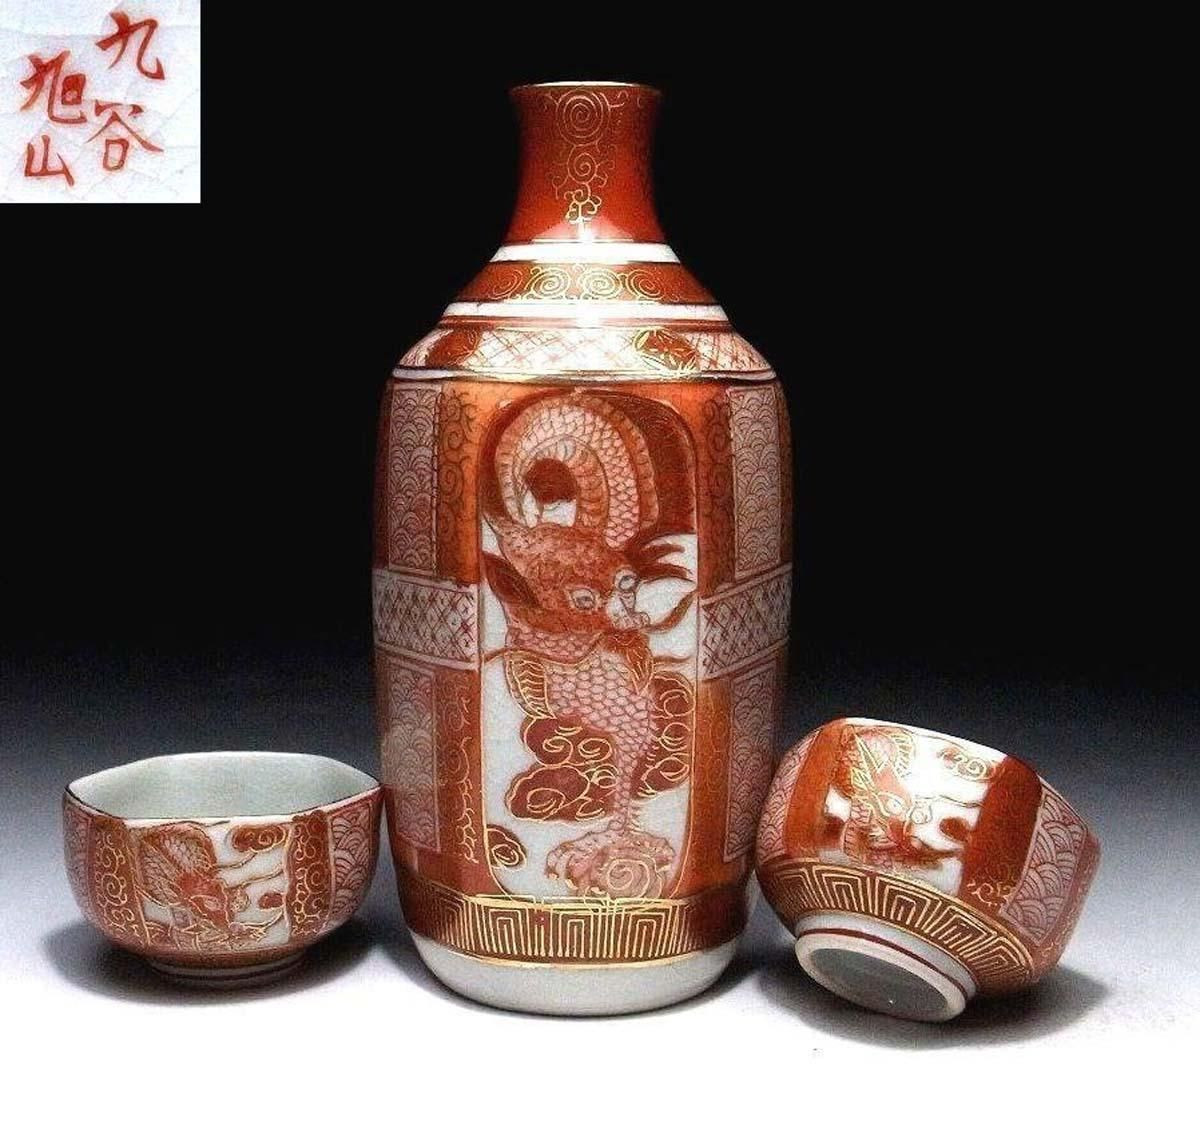 13 Lovable Vintage Face Vase 2024 free download vintage face vase of japanese vintage kutani yaki porcelain tokkuri and cups by famous for from the many faces of japan on ruby lane